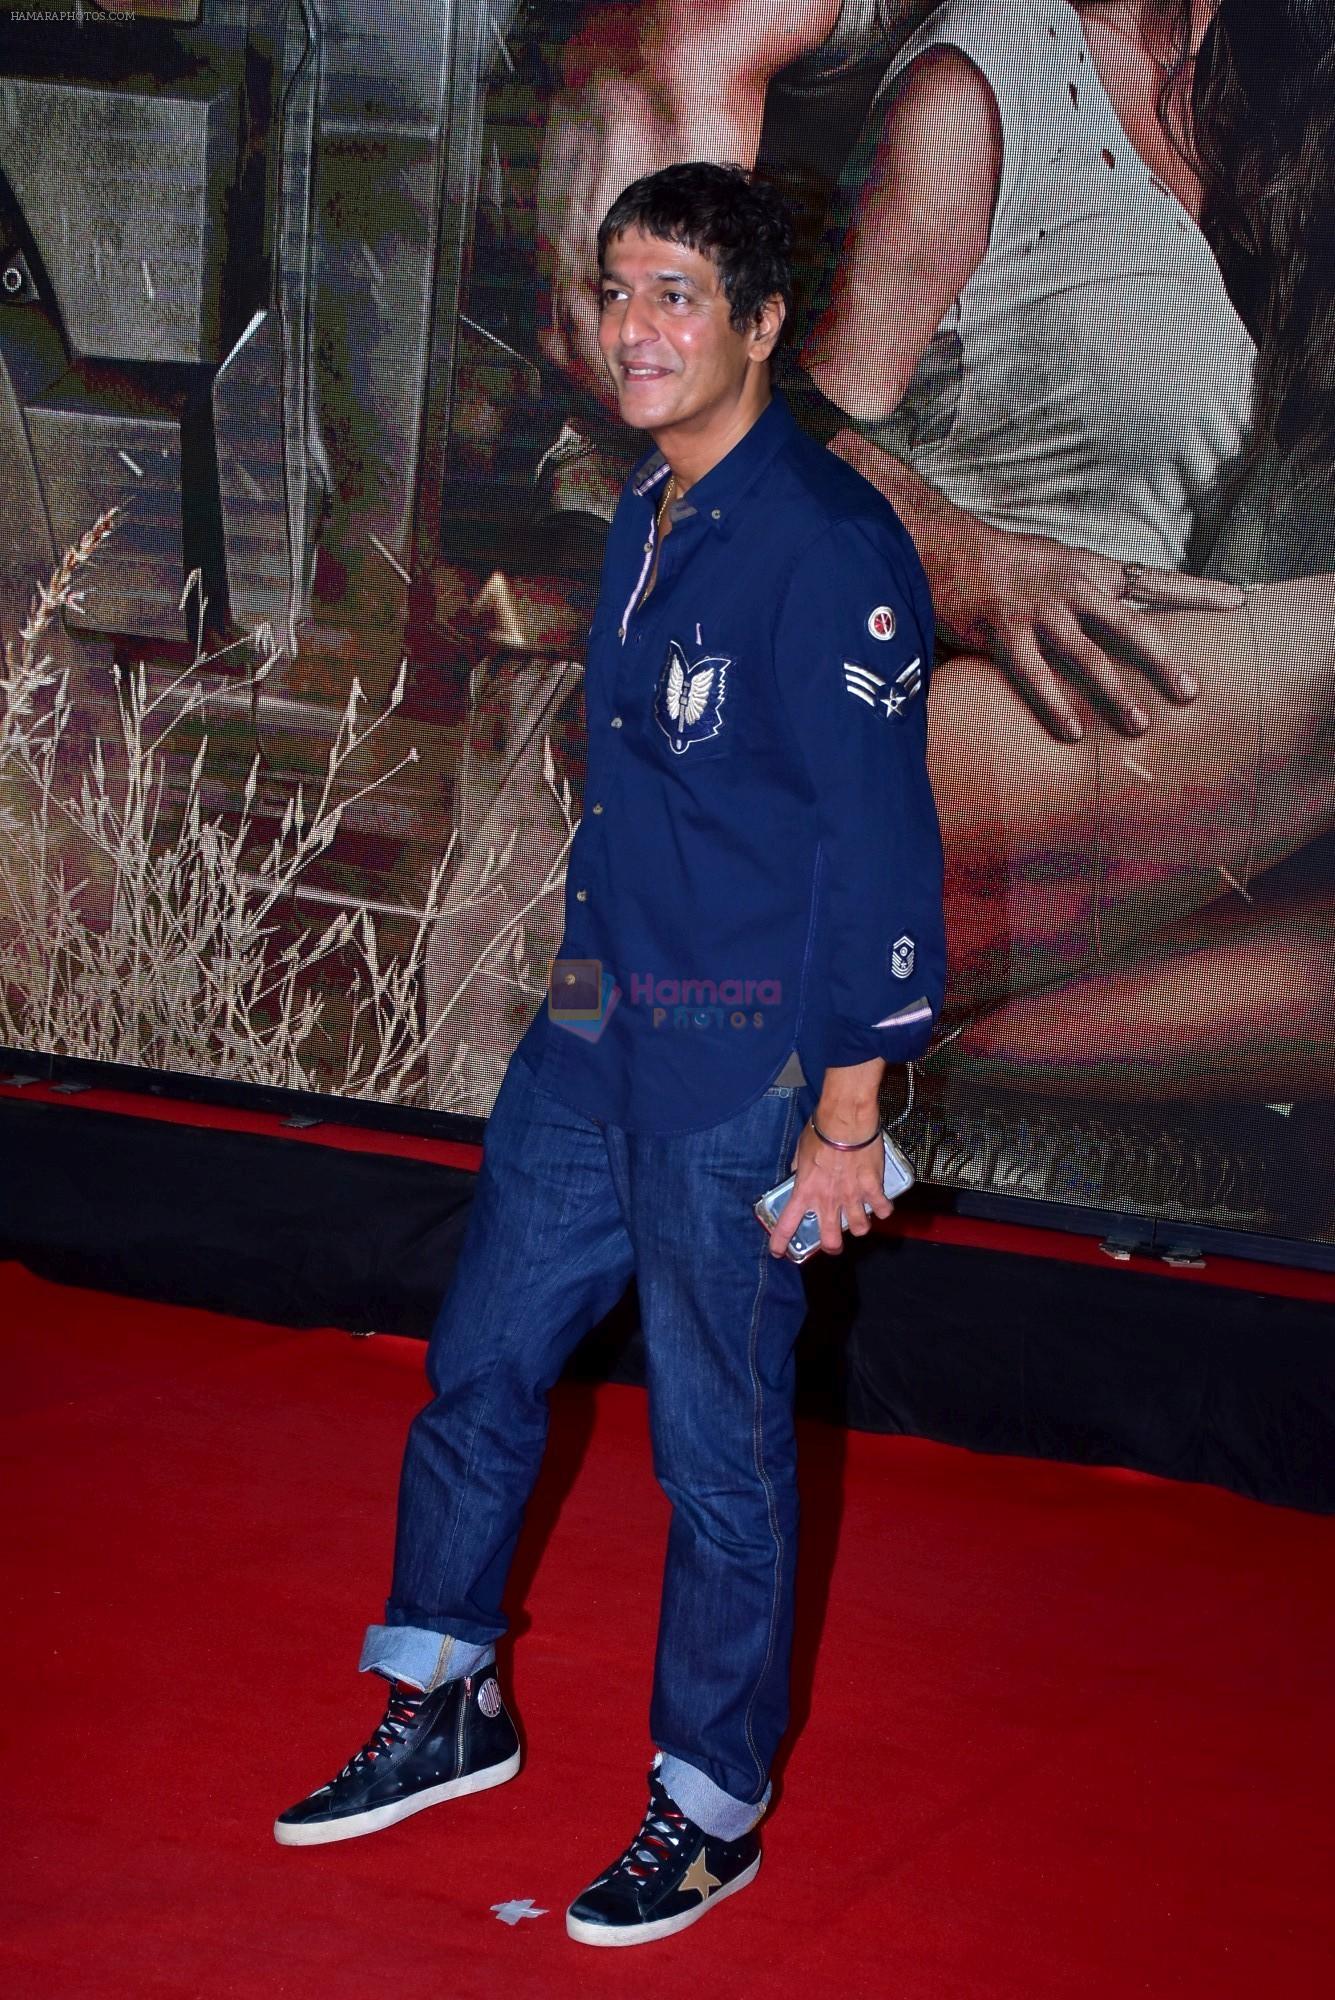 Chunky Pandey at the Special Screening Of Film Baaghi 2 on 29th March 2018